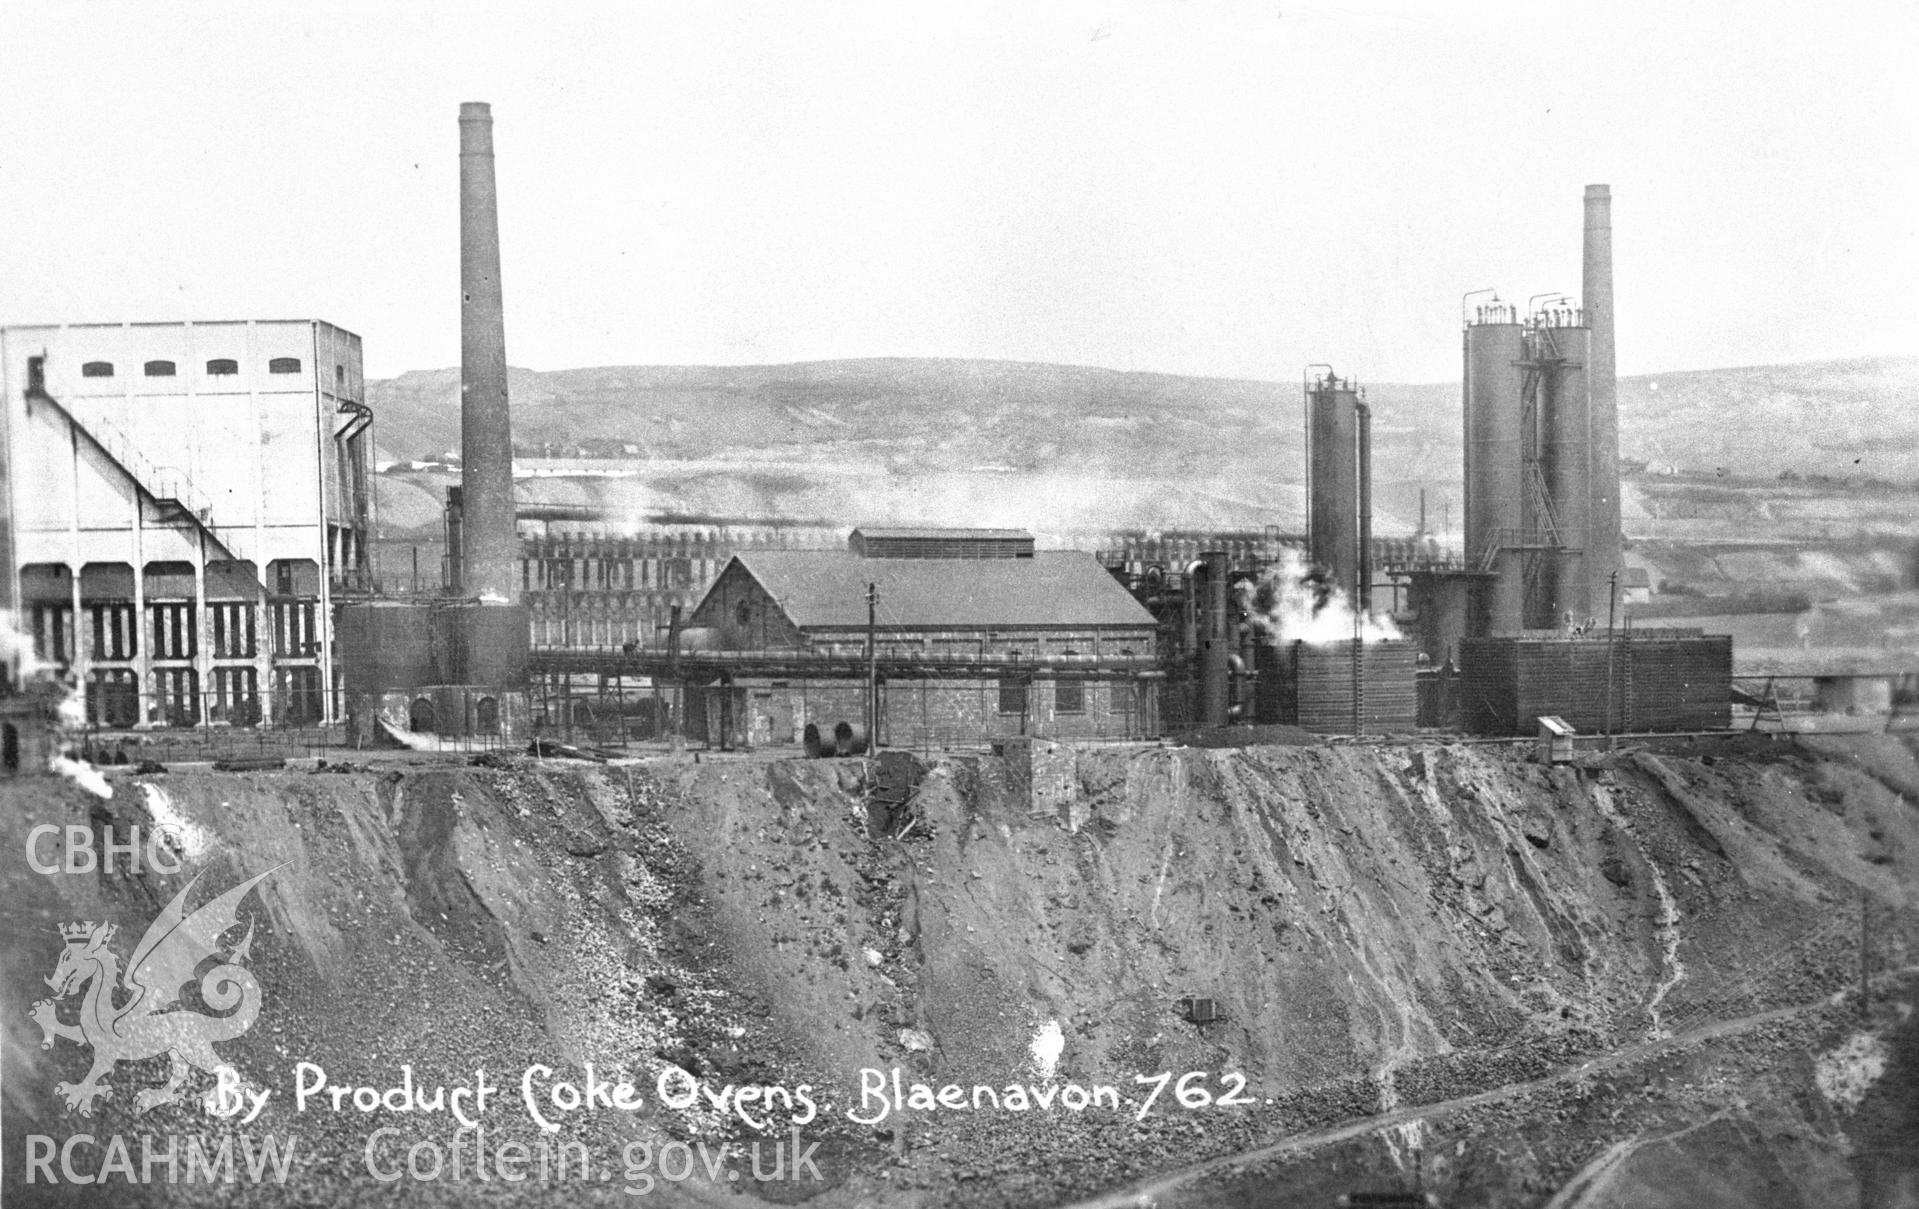 Digital copy of an acetate negative showing Big Pit - Blaenavon coke ovens from south, from the John Cornwell Collection.